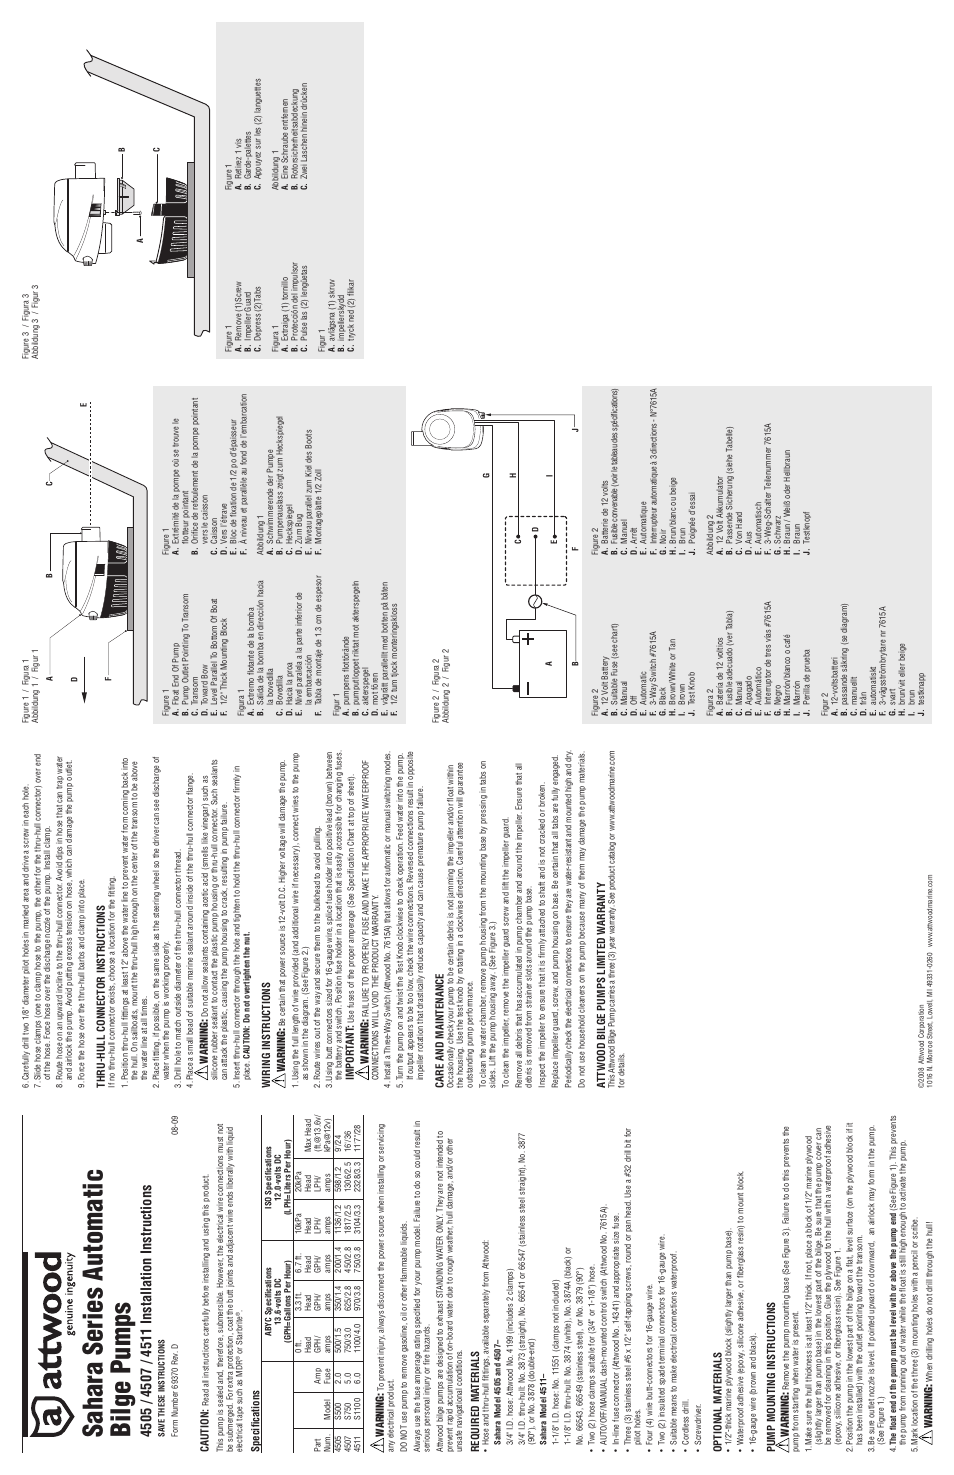 wiring diagram for automatic bilge pump s1100